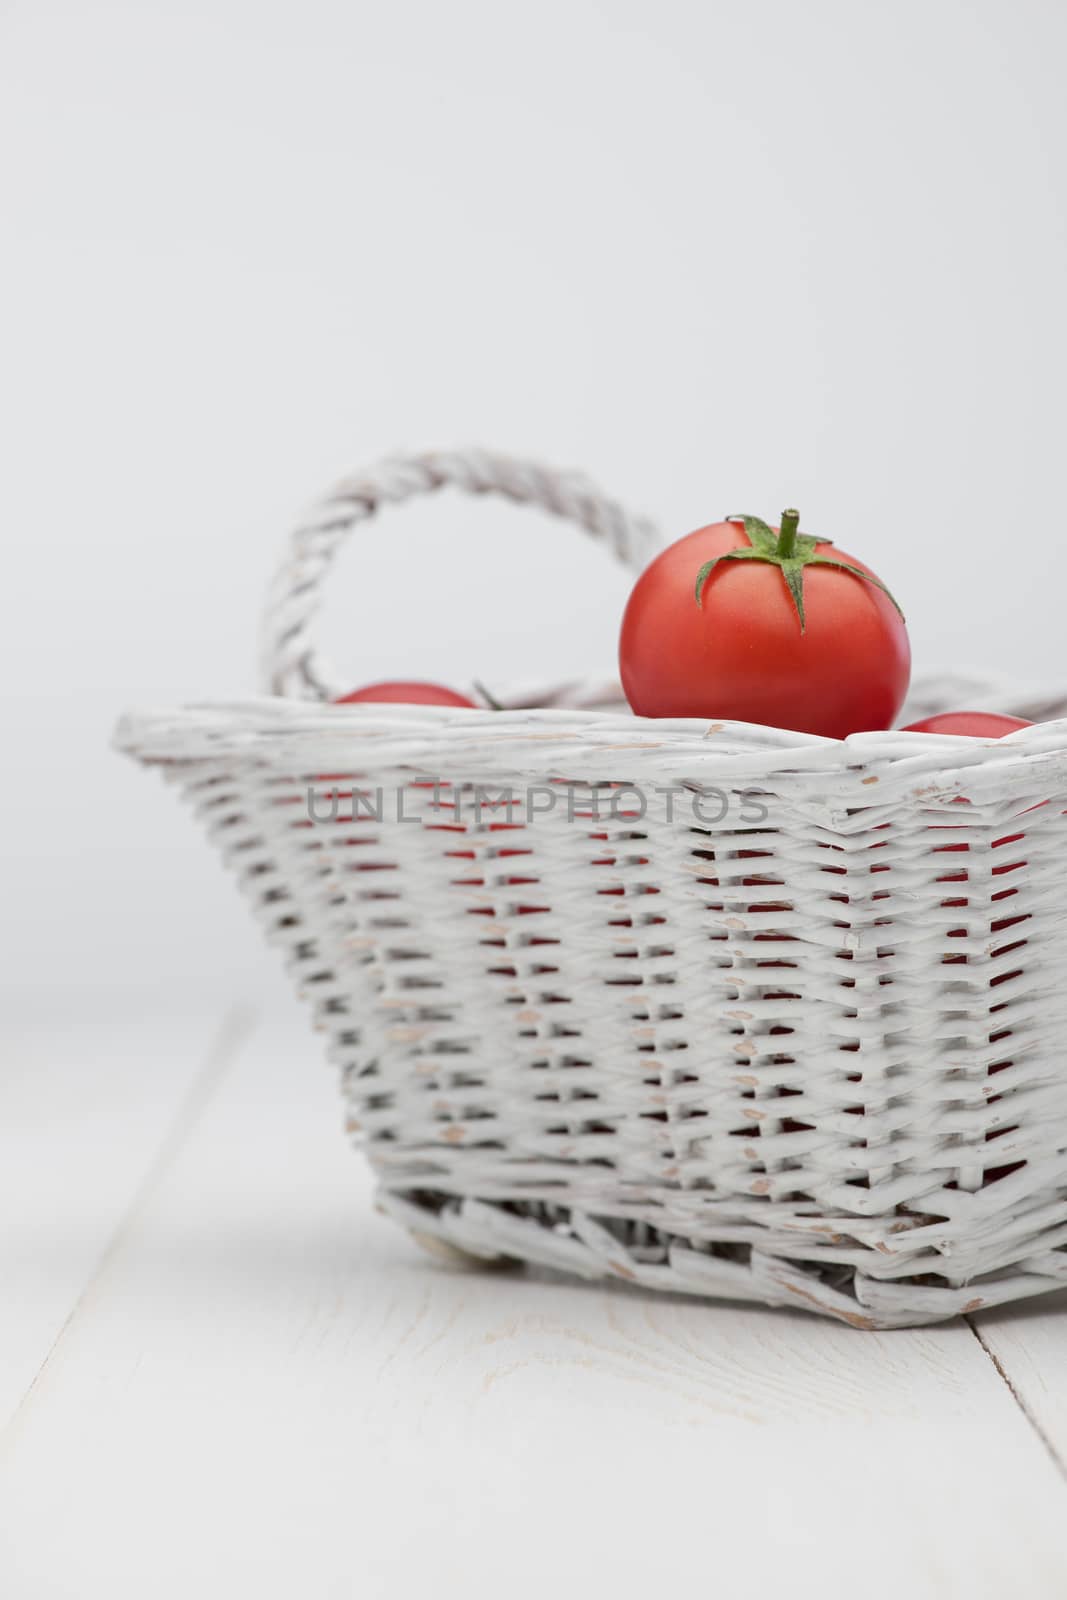 tomatoes in a white basket by A_Karim